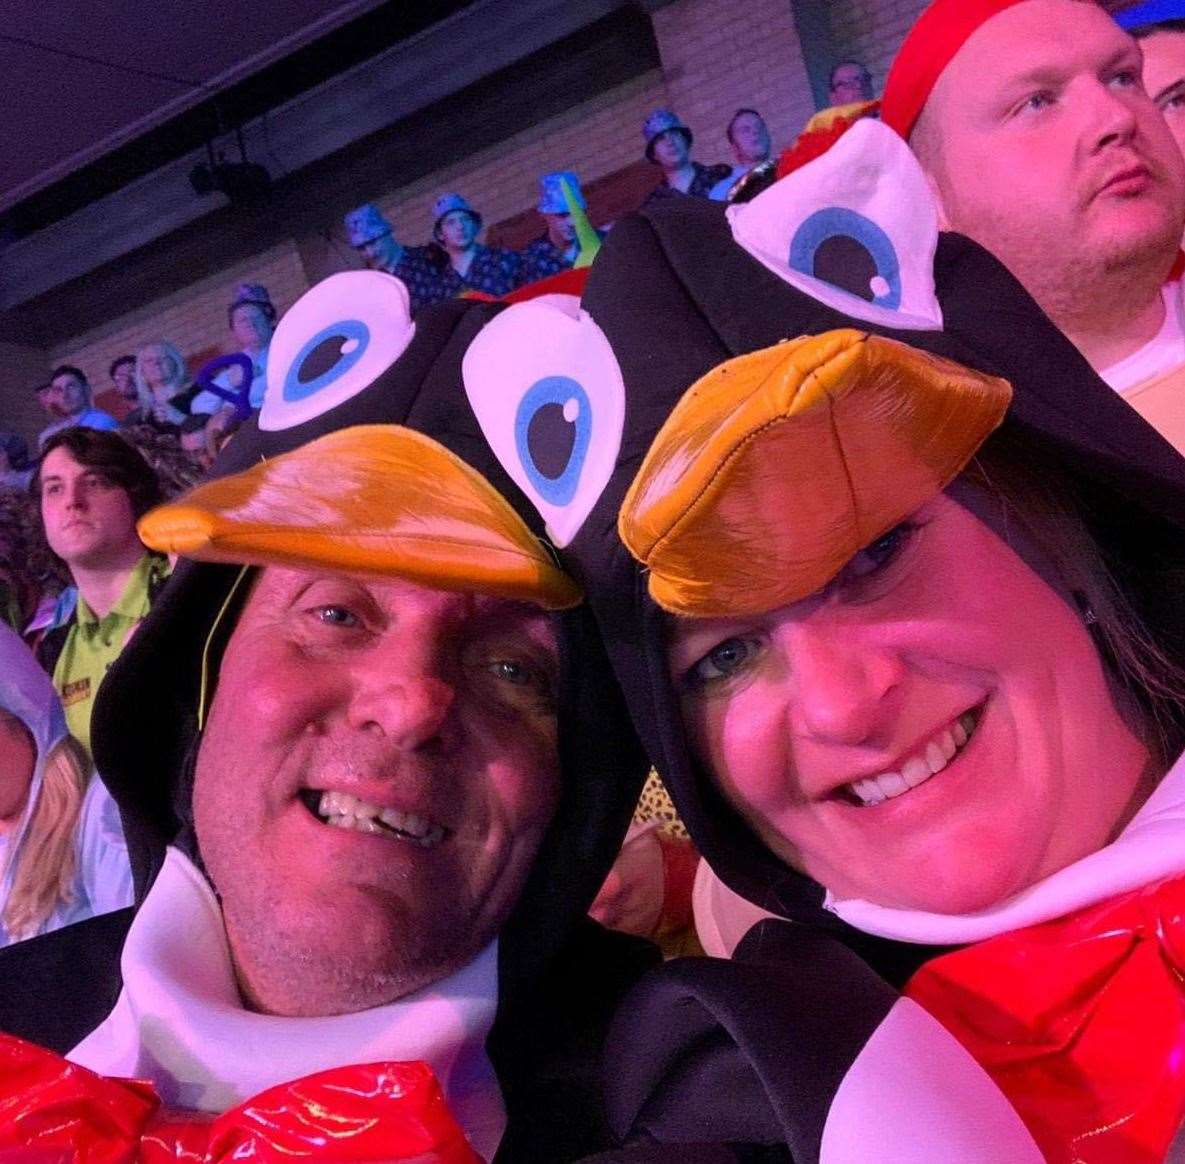 Andy and Naomi together at the darts in Ally Pally